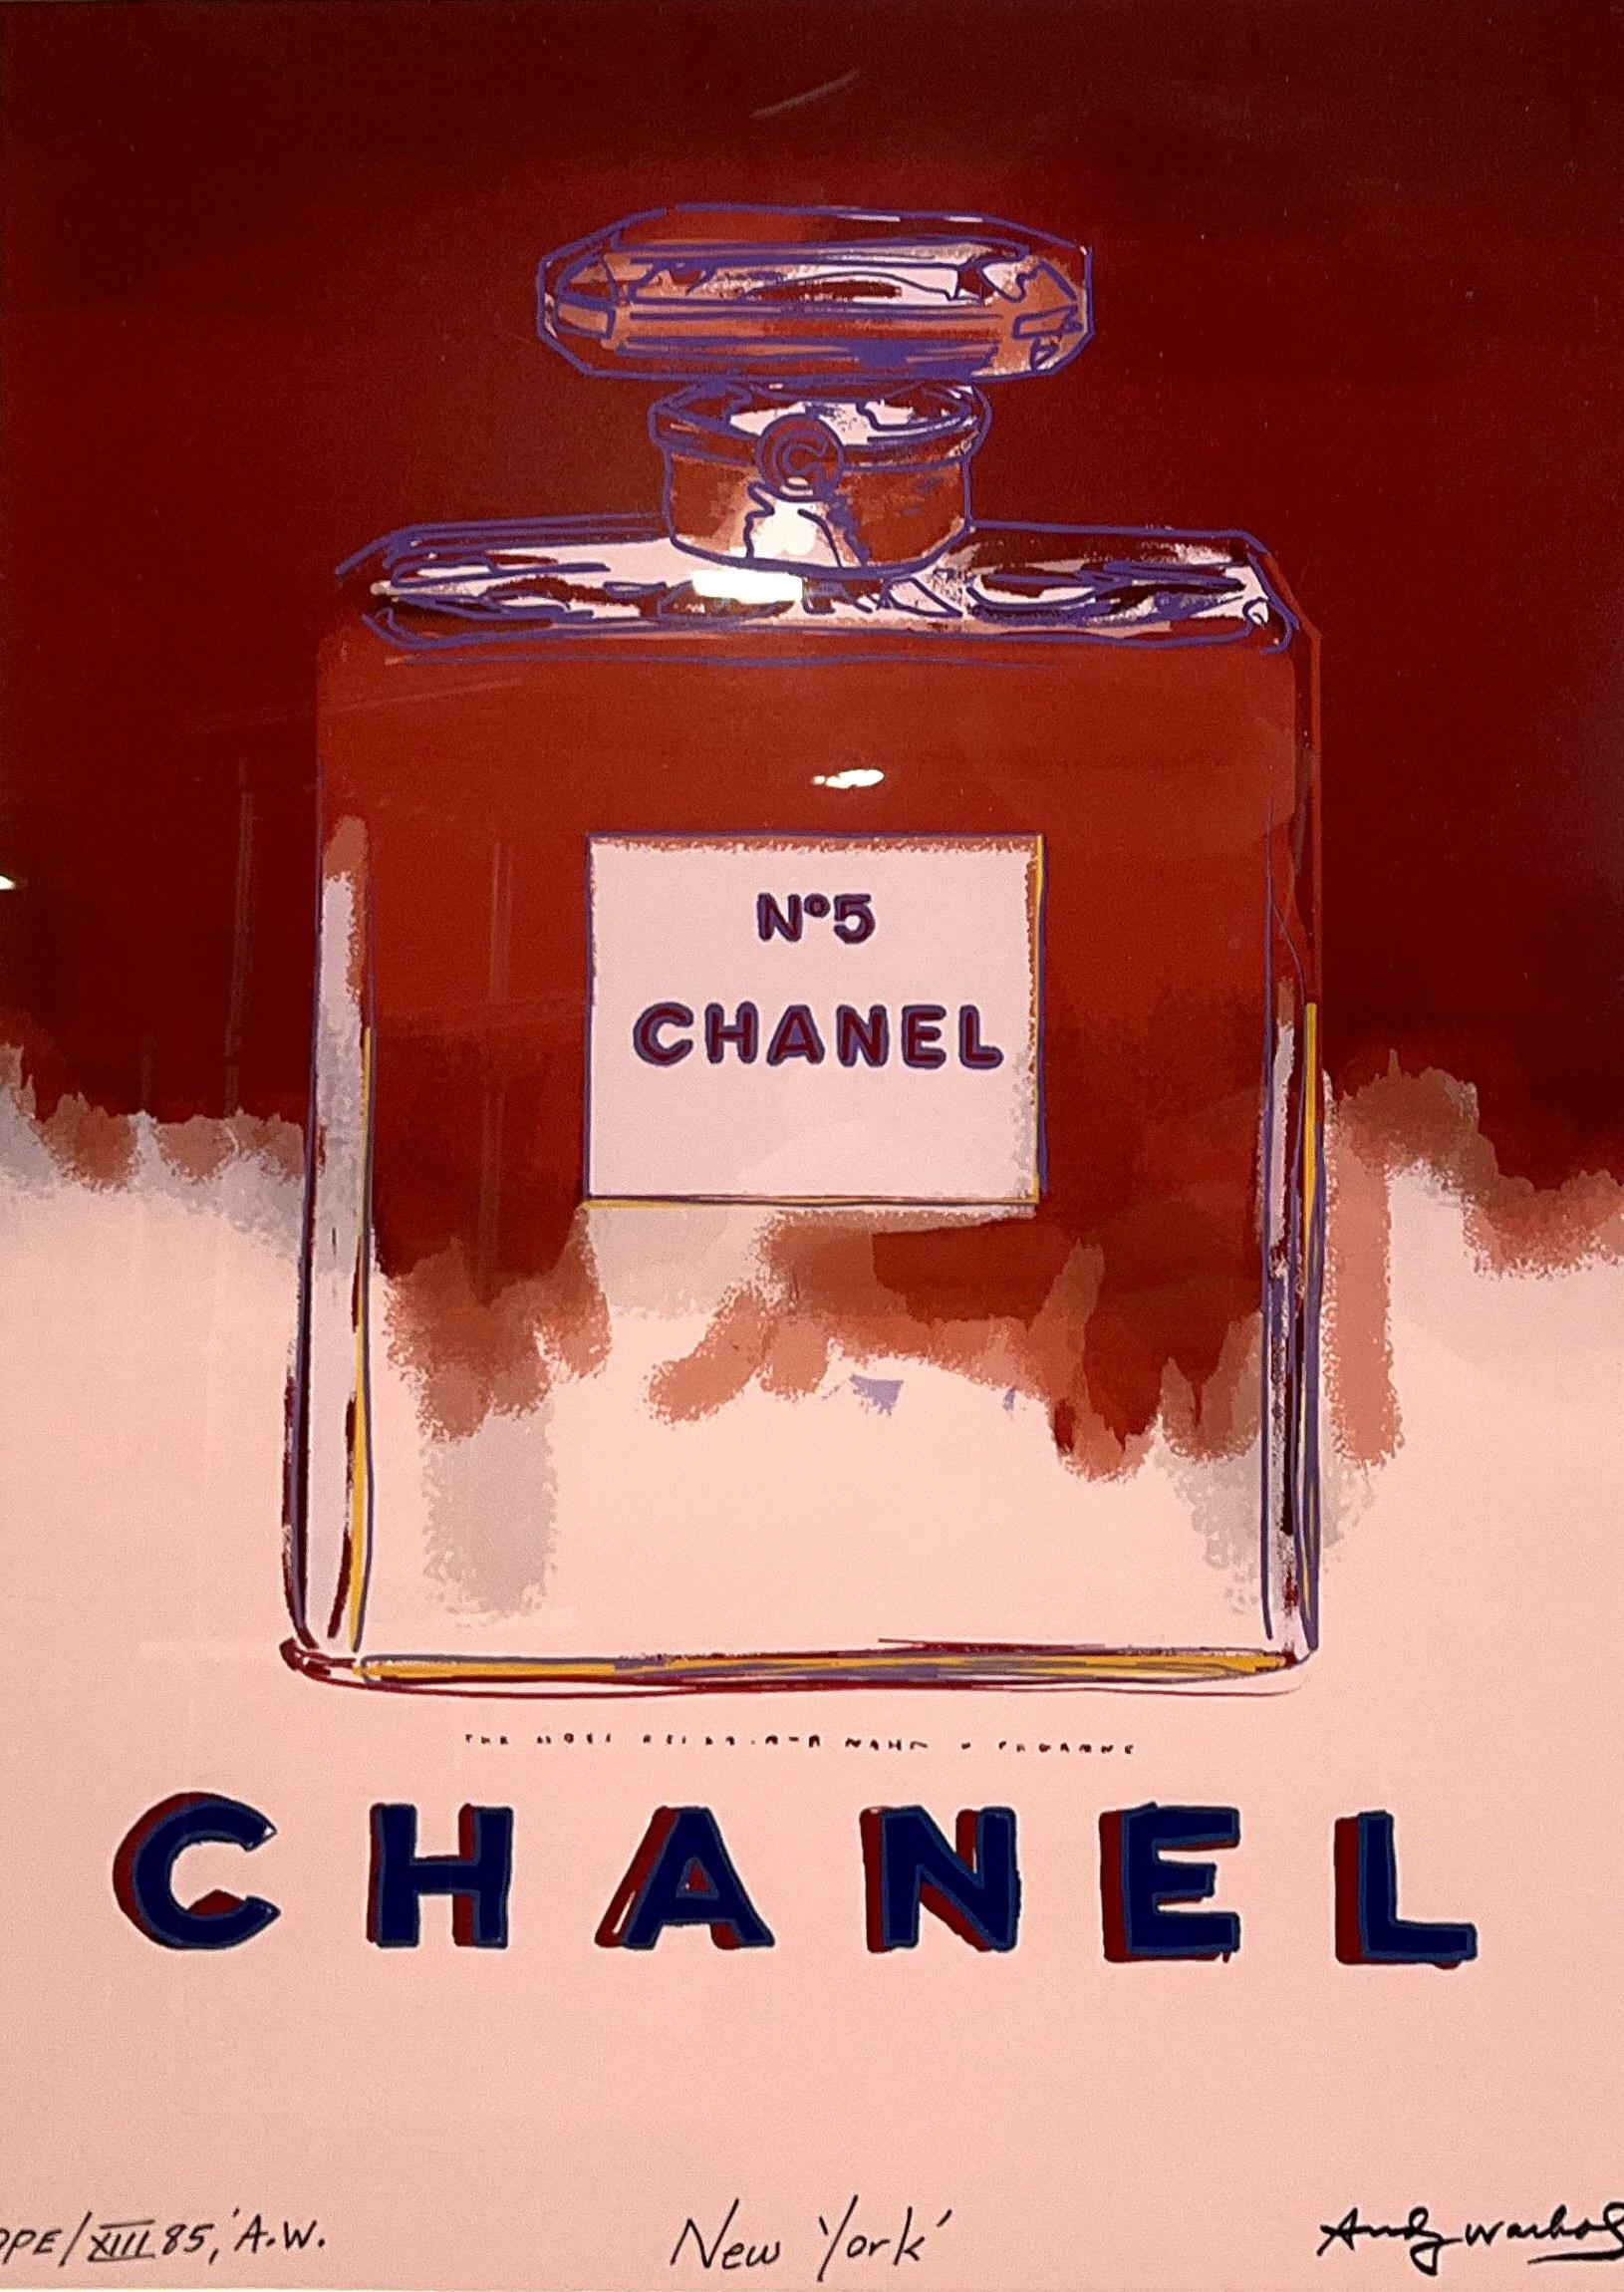 Artwork by Andy Warhol, Chanel No.5 (Red/Pink), Made of Lithograph